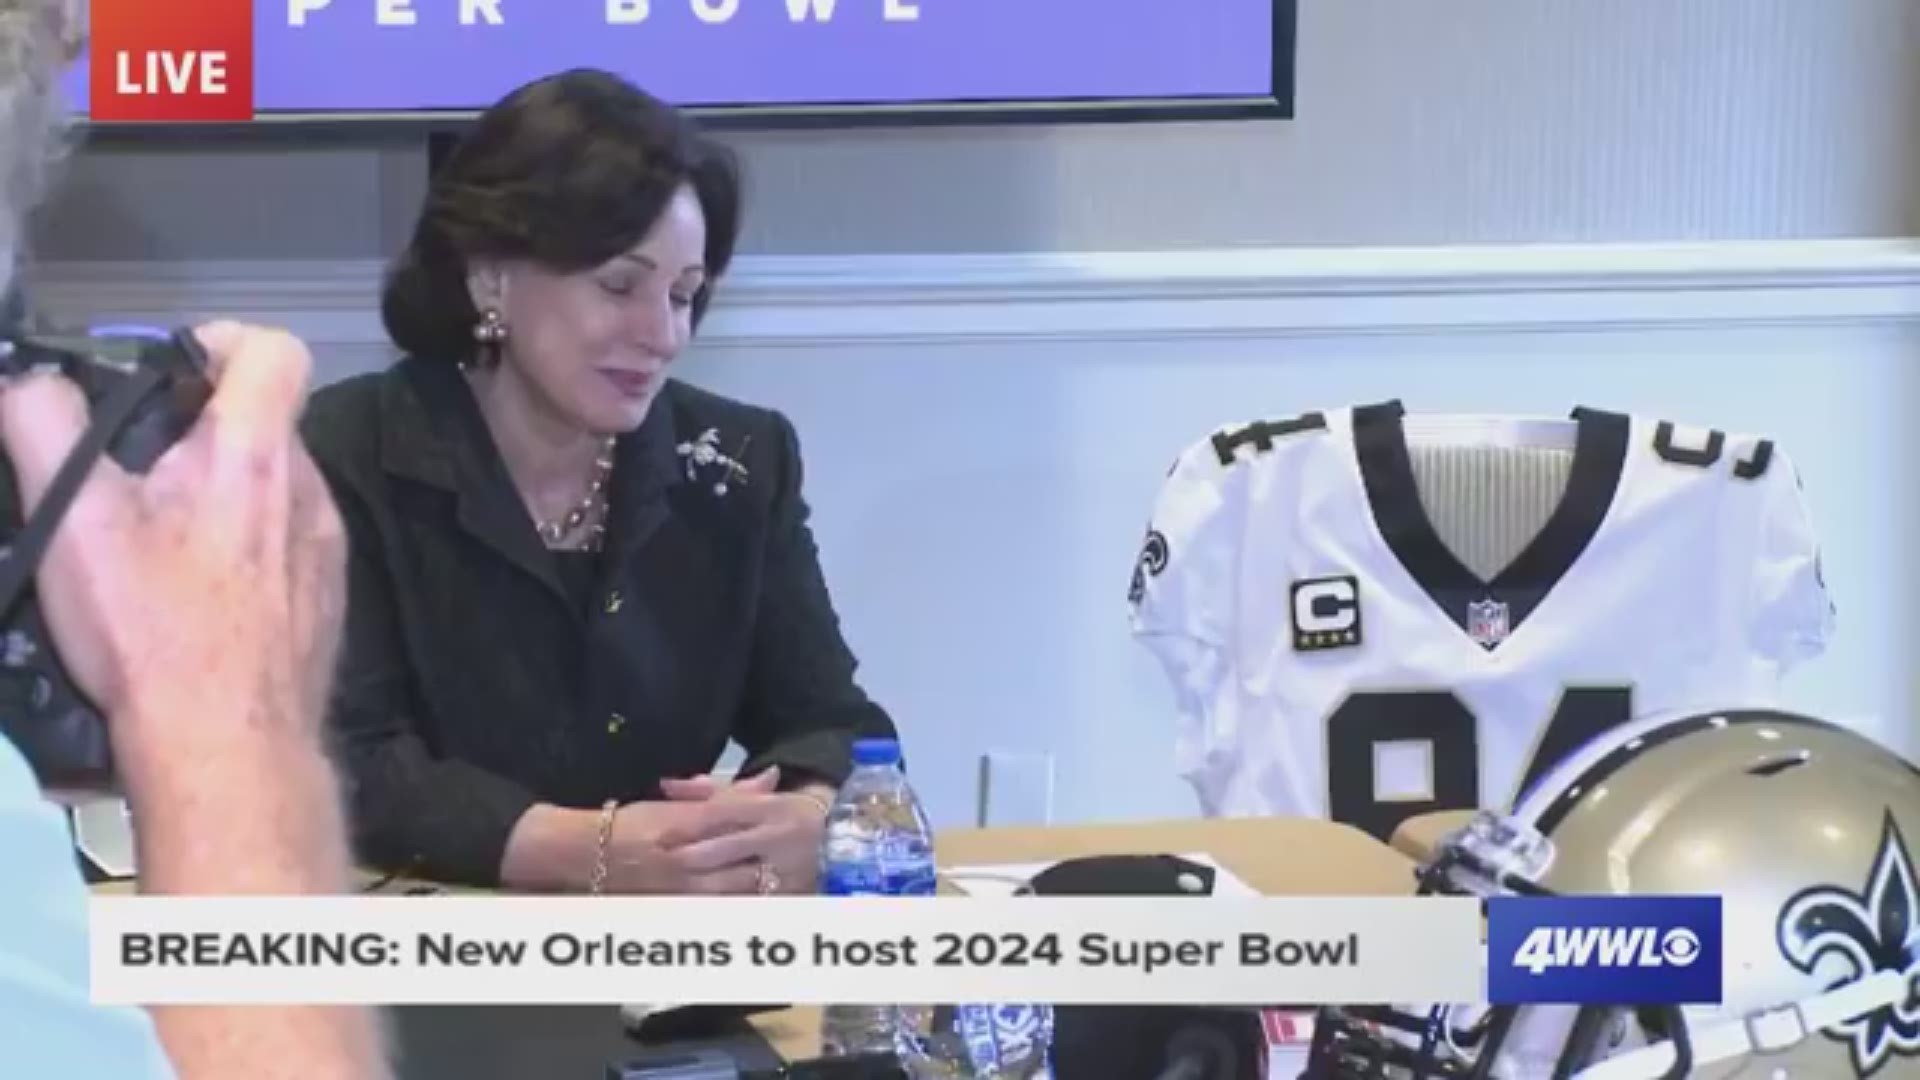 'We got it!' New Orleans to officially host 2024 Super Bowl